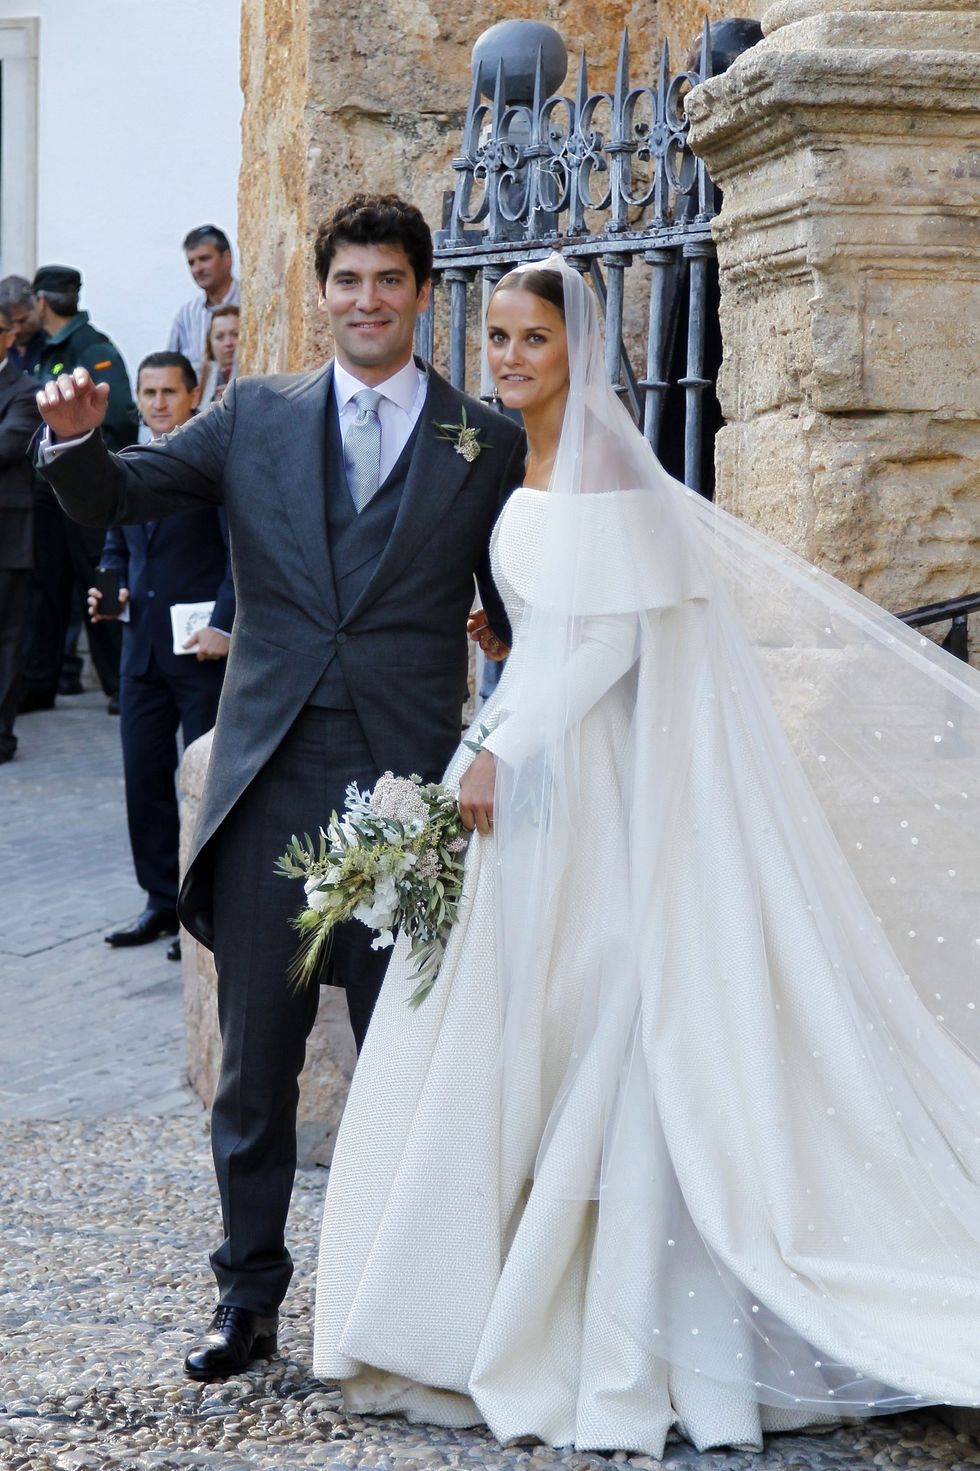 The Best Royal Wedding Dresses of All Time